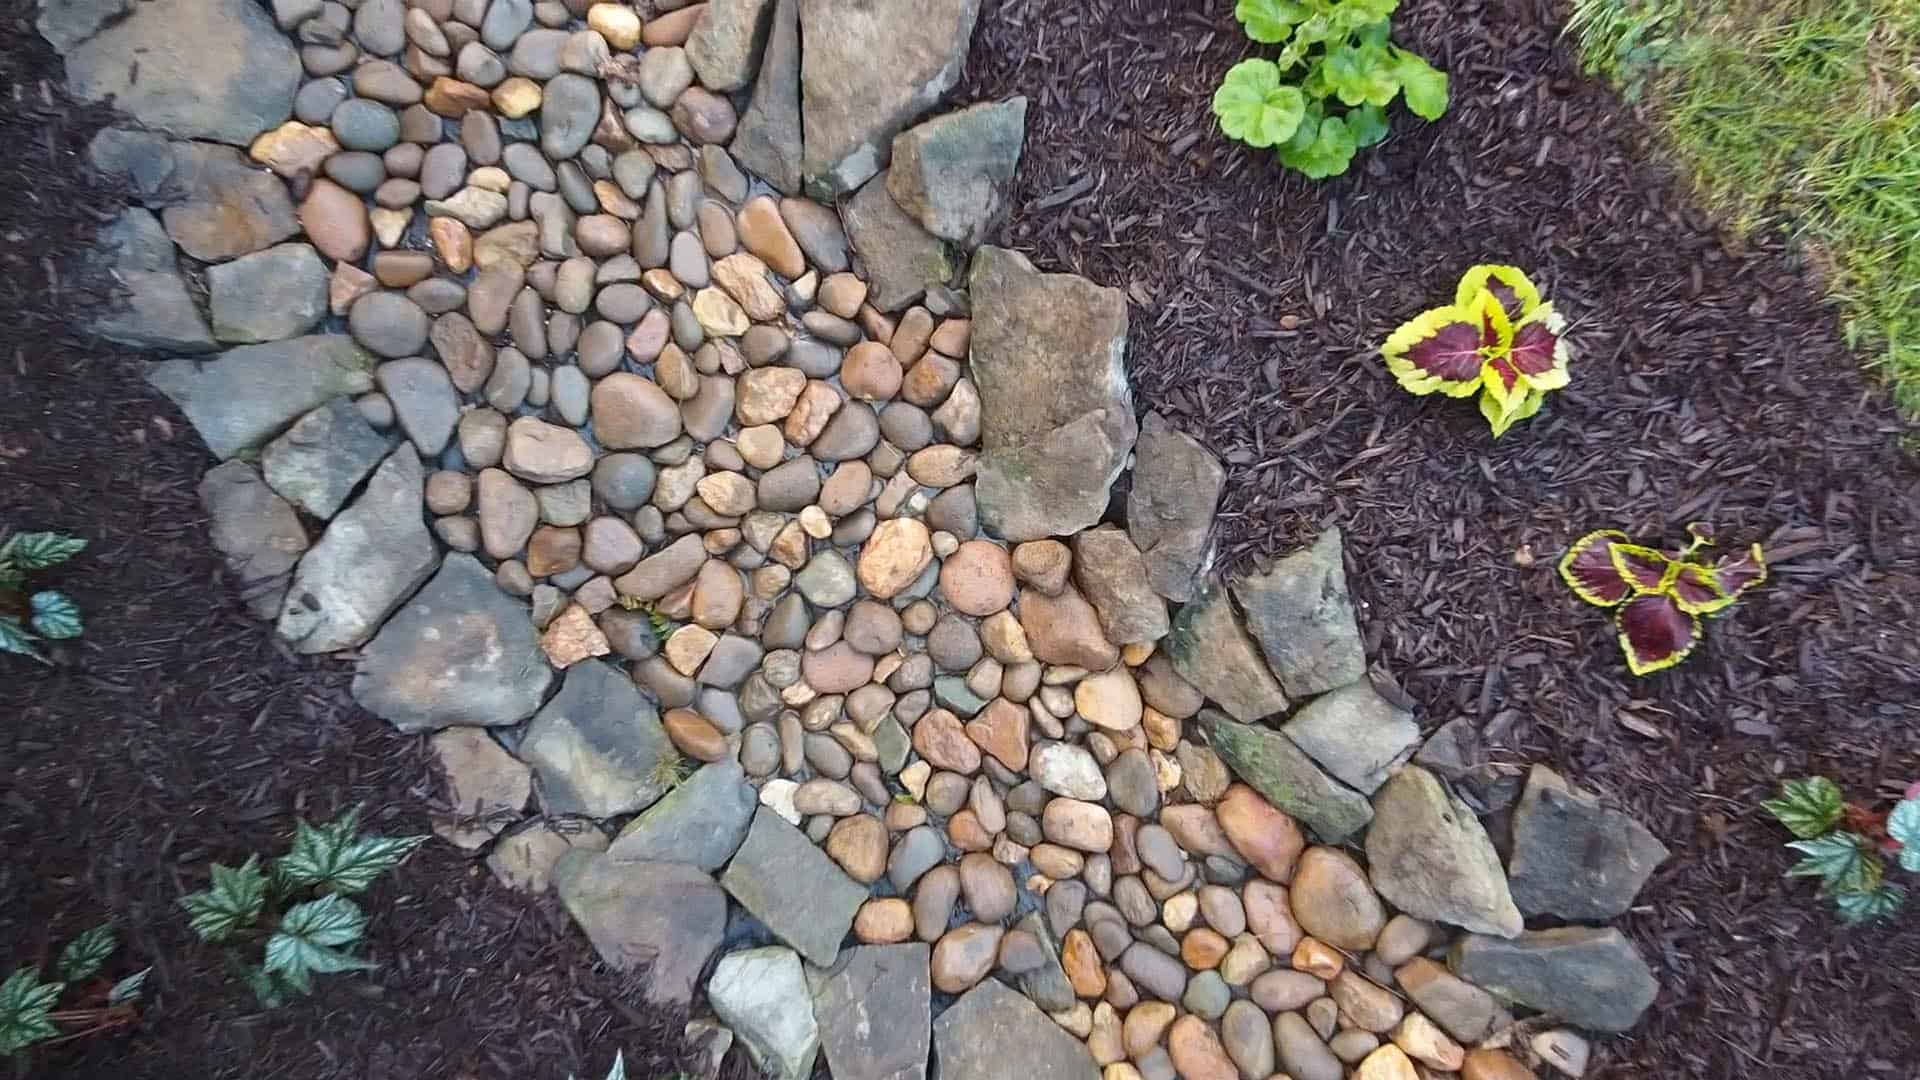 Natural landscaping with a Dry creek bed